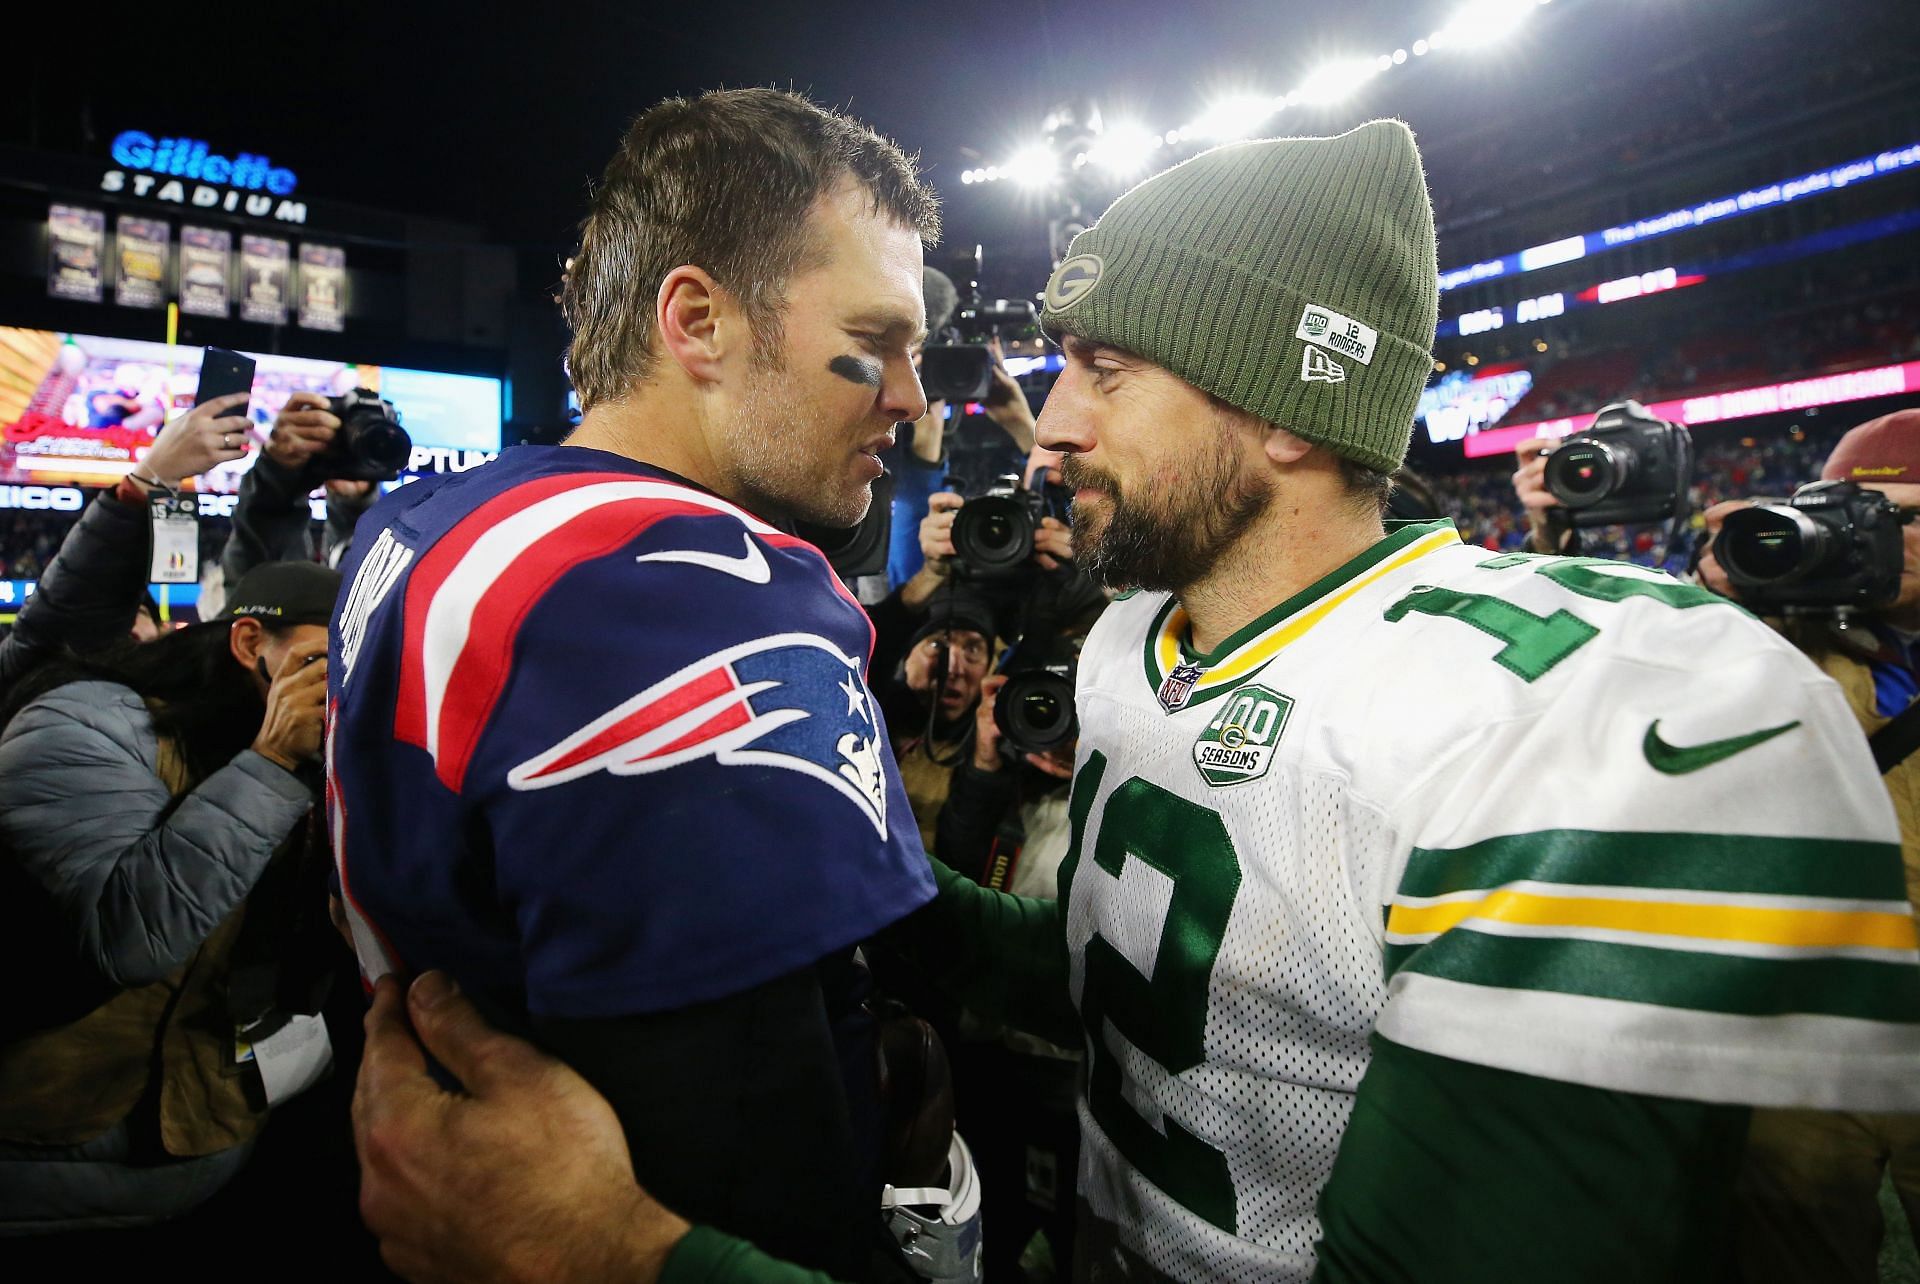 Green Bay Packers QB Aaron Rodgers and former New England Patriots QB Tom Brady